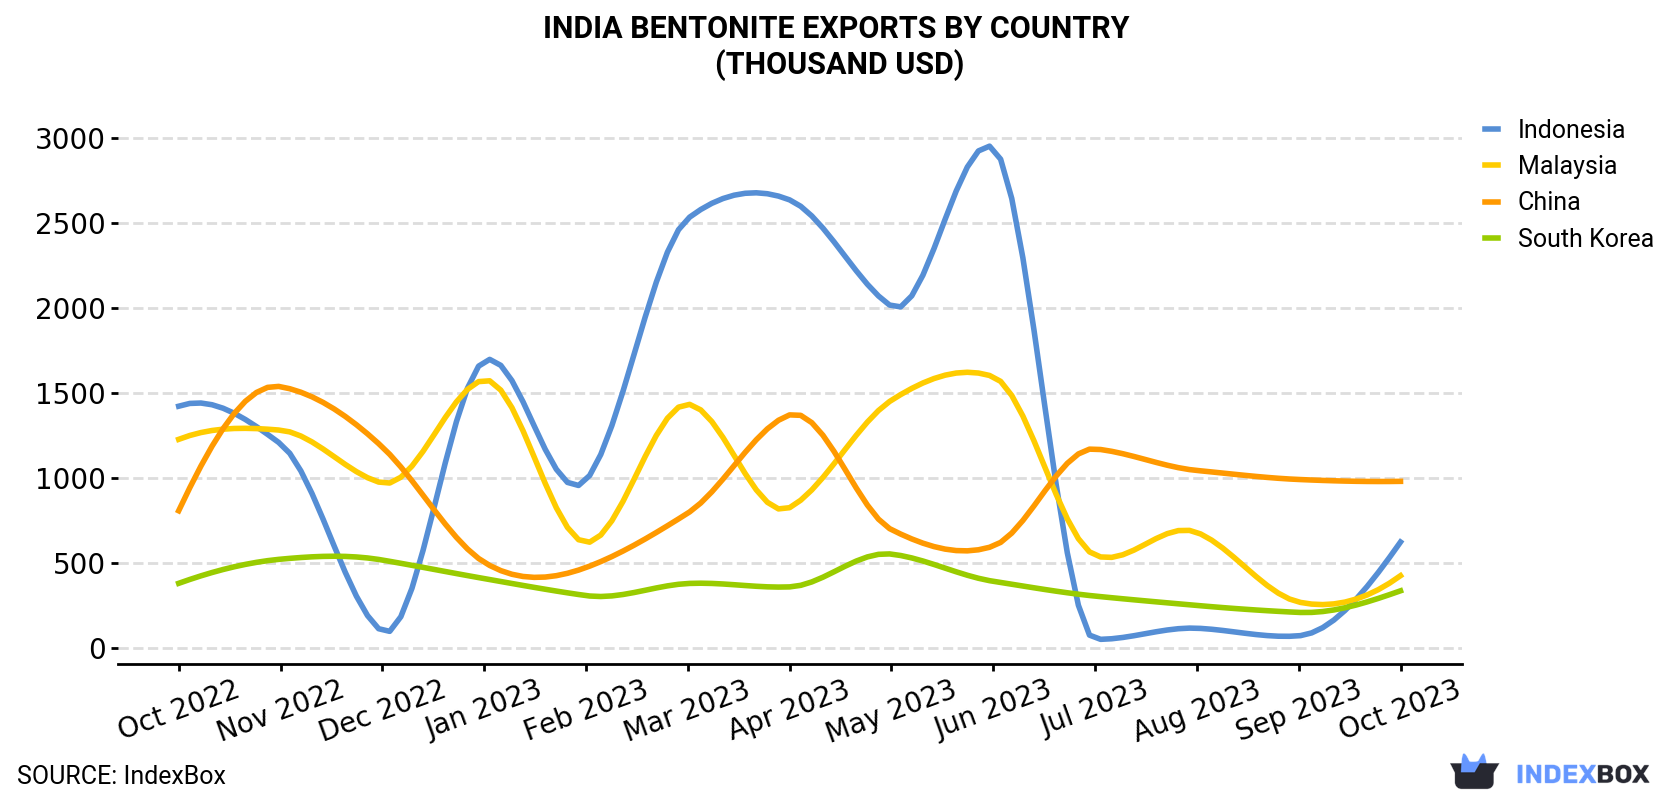 India Bentonite Exports By Country (Thousand USD)